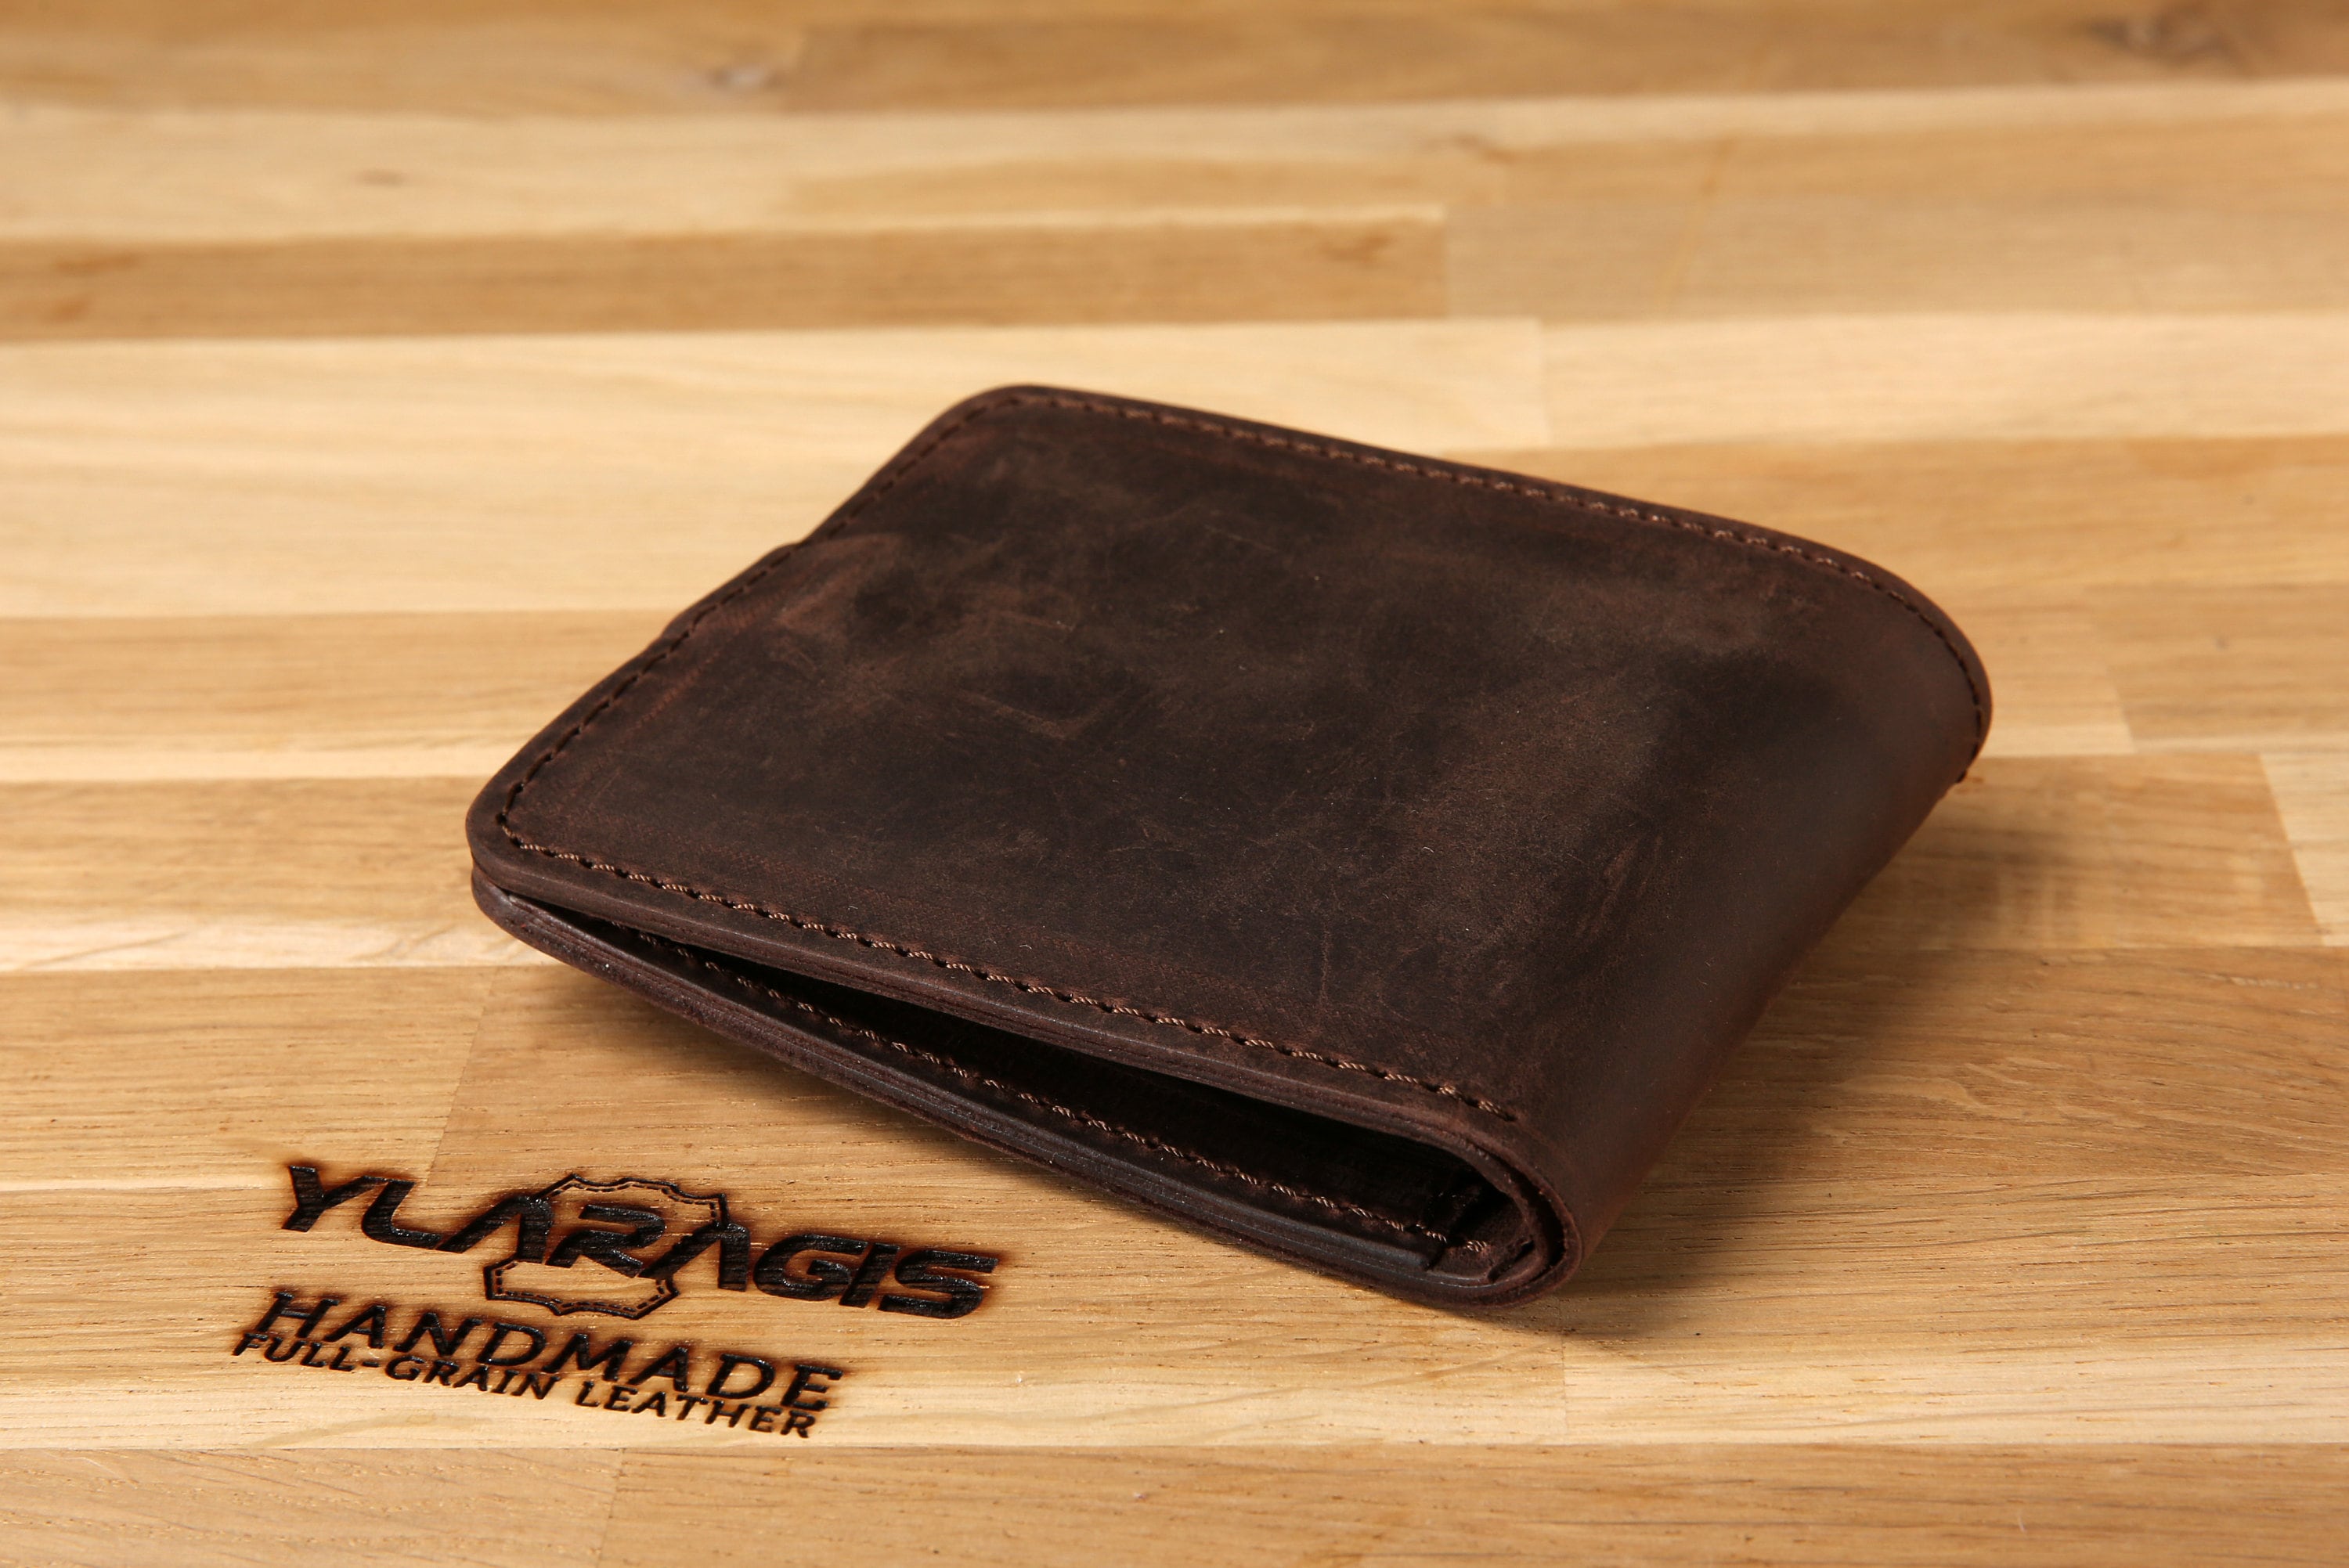 Men's Small Wallets as Gifts for Christmas